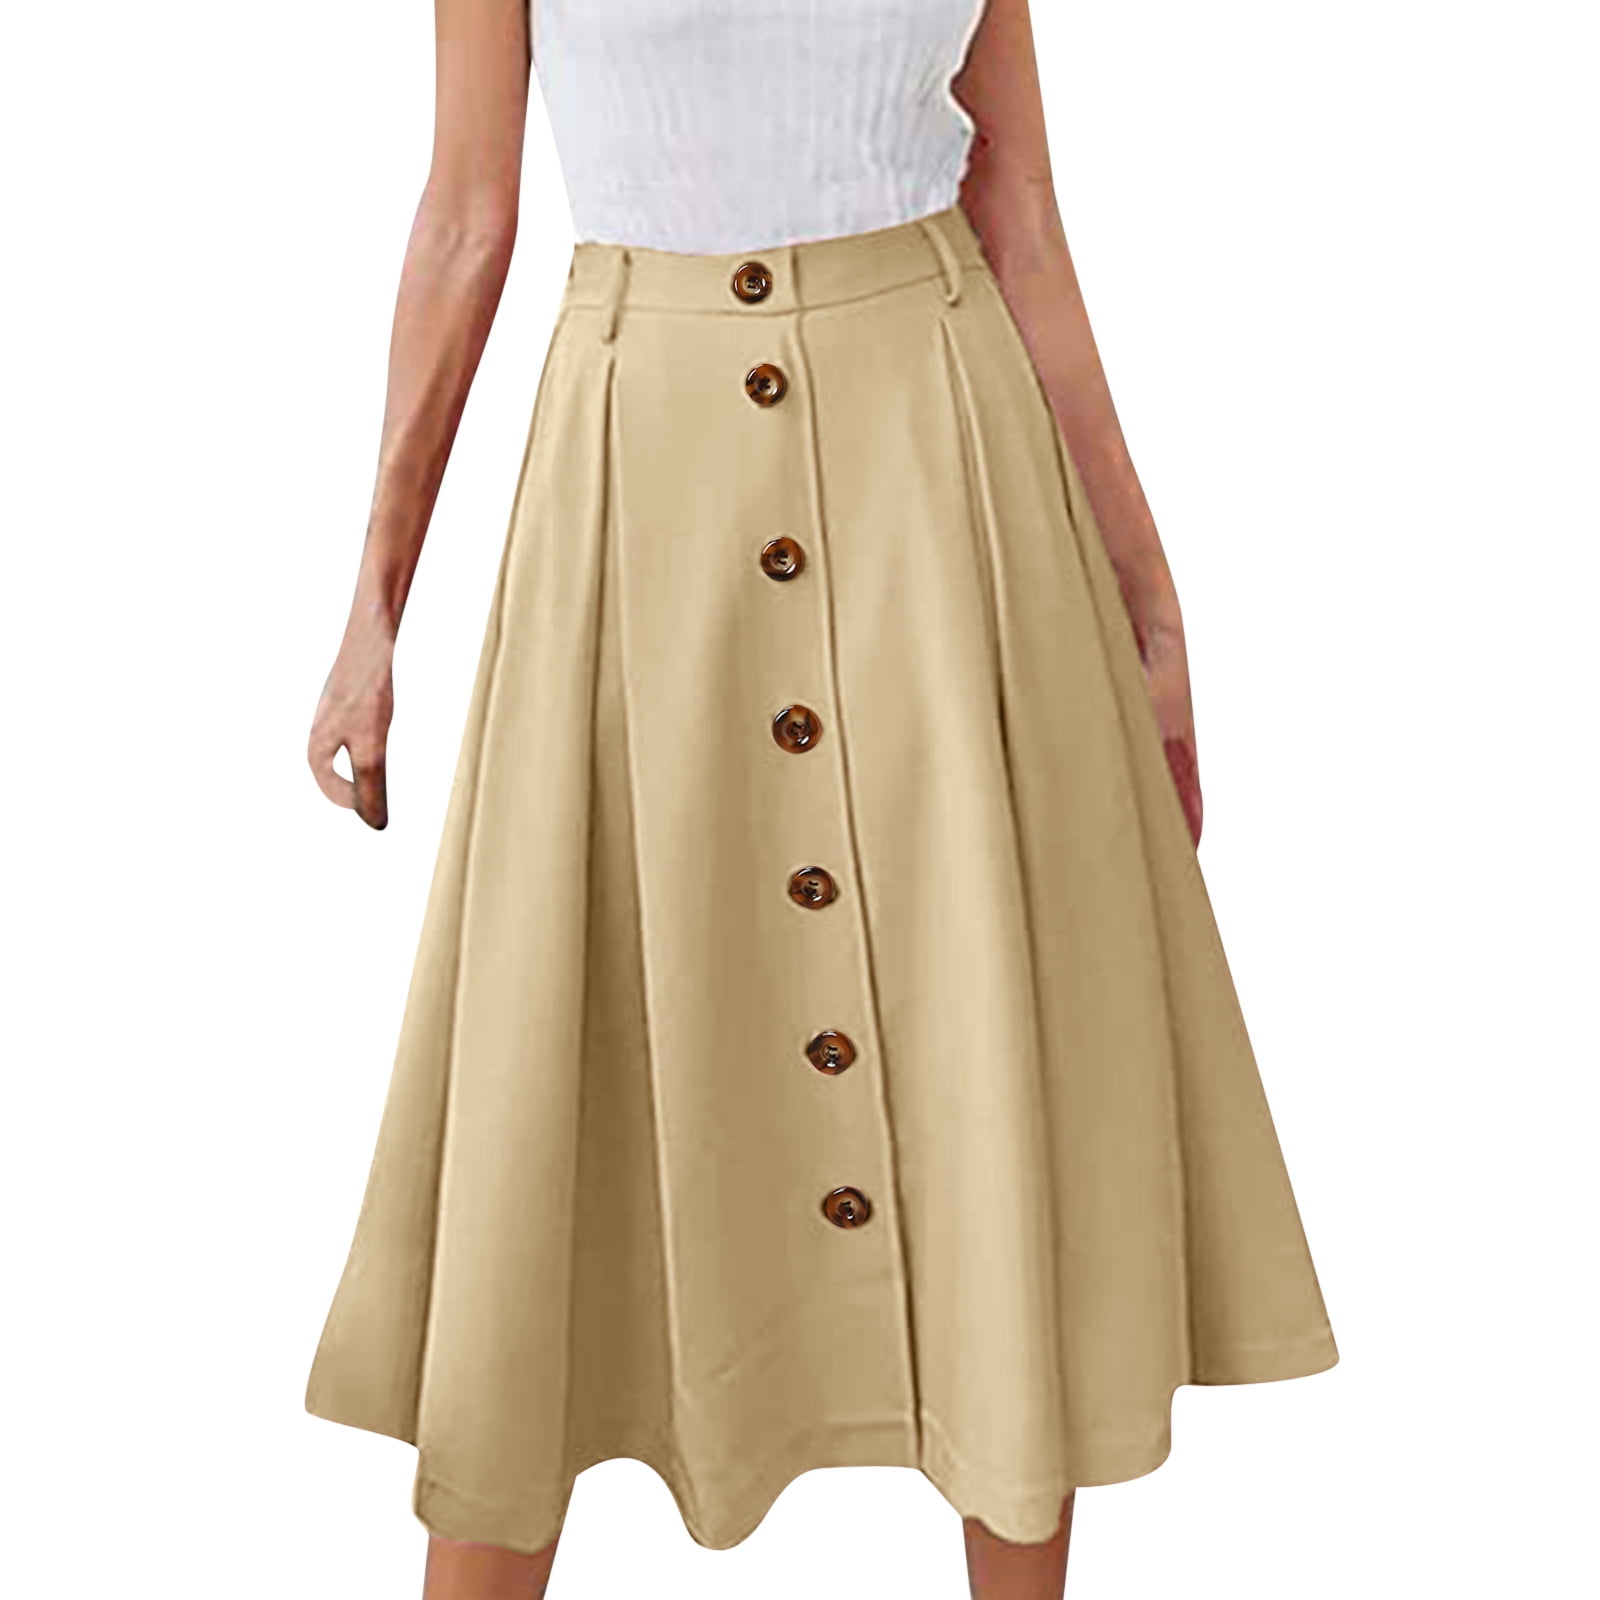 xiuh women's solid color elastic waist pleated button front long skirt ...